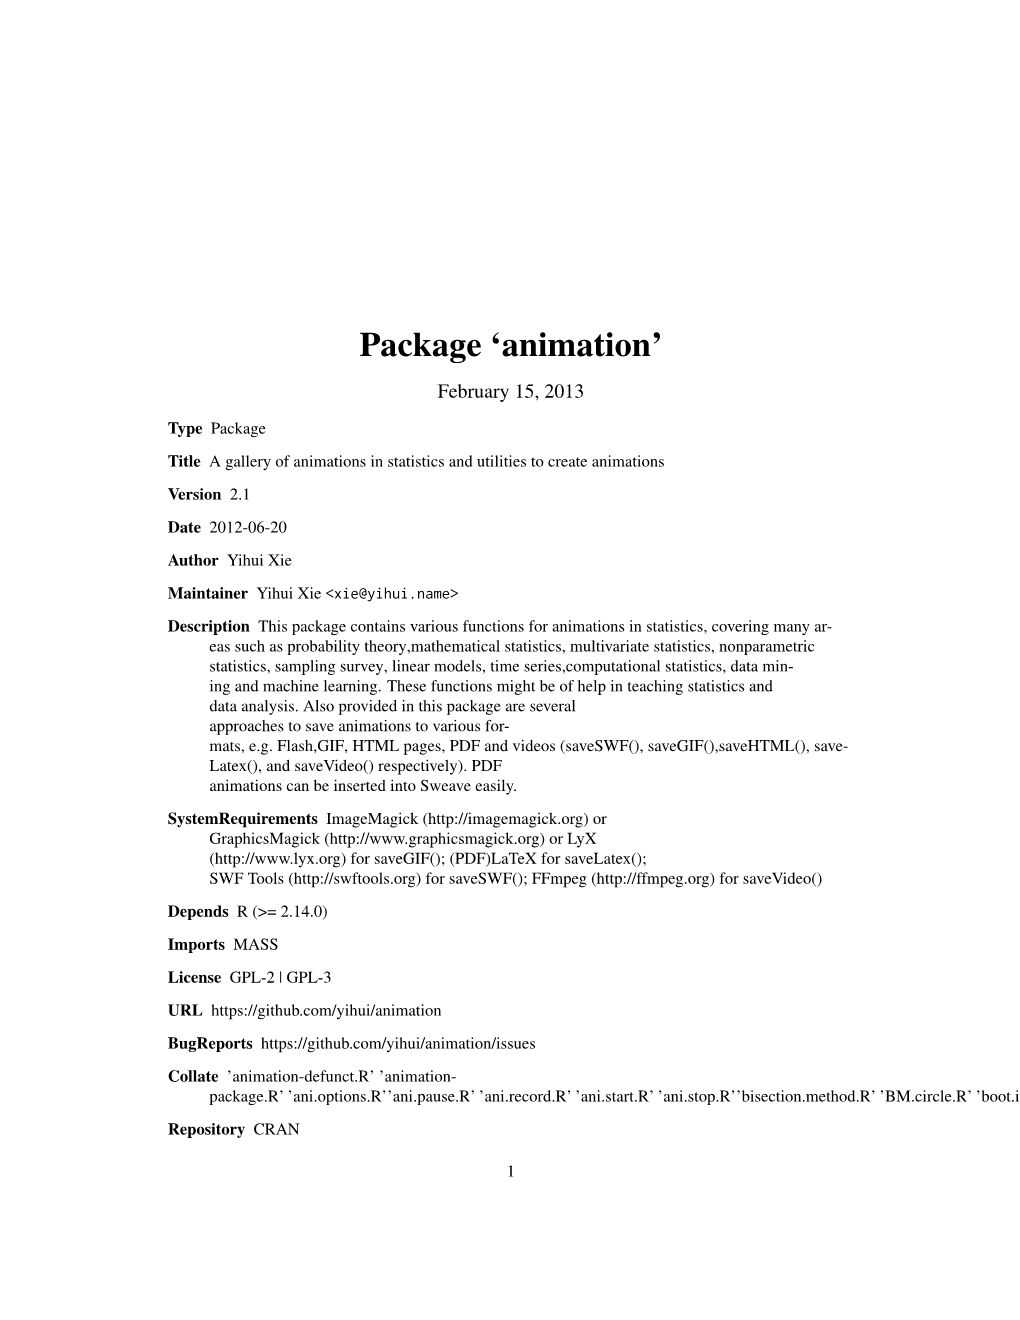 Package 'Animation'